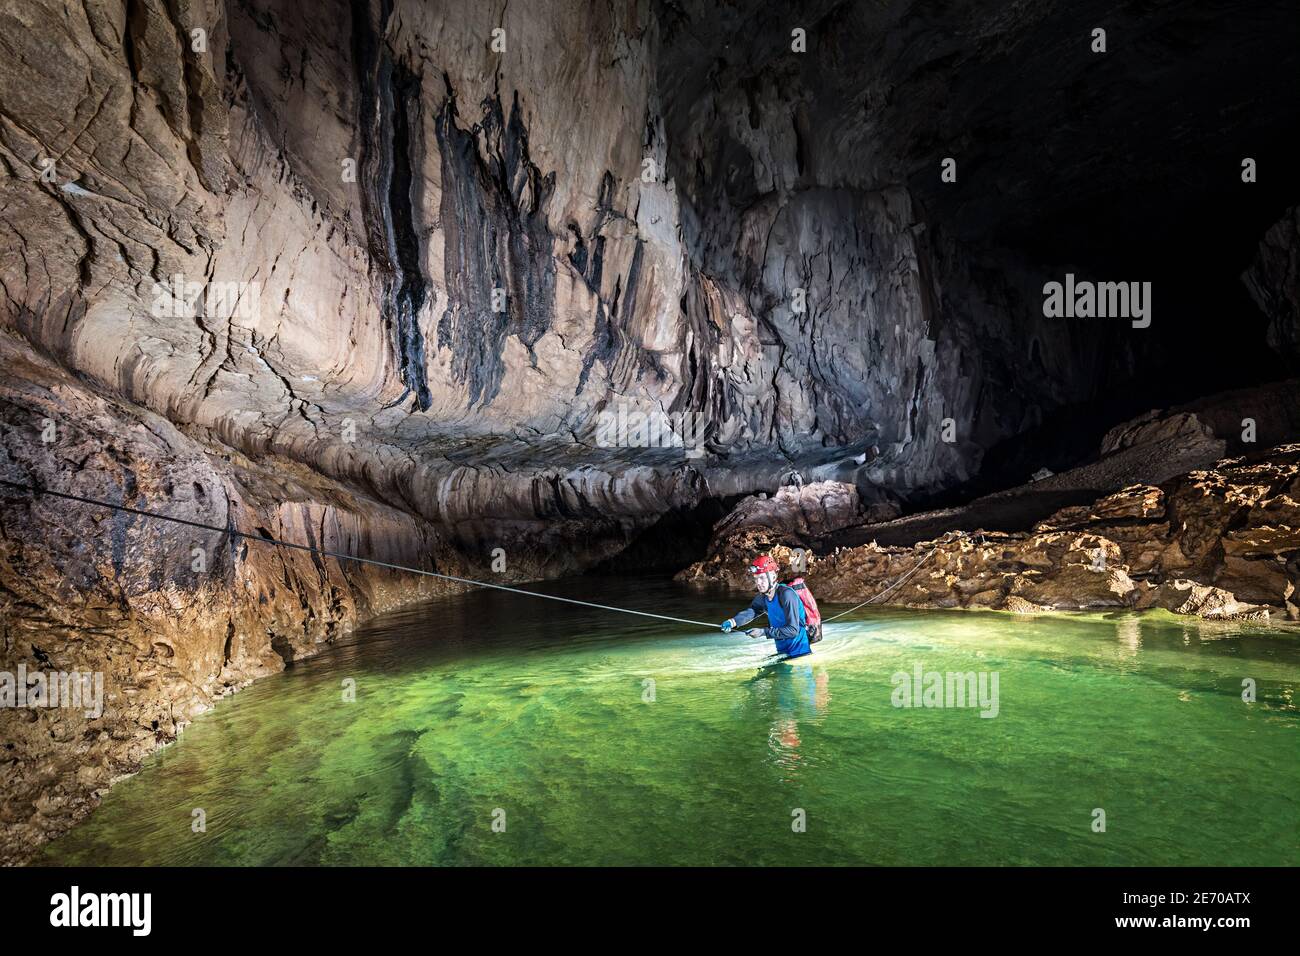 River crossing, Clearwater Cave, Mulu, Malaysia Stock Photo